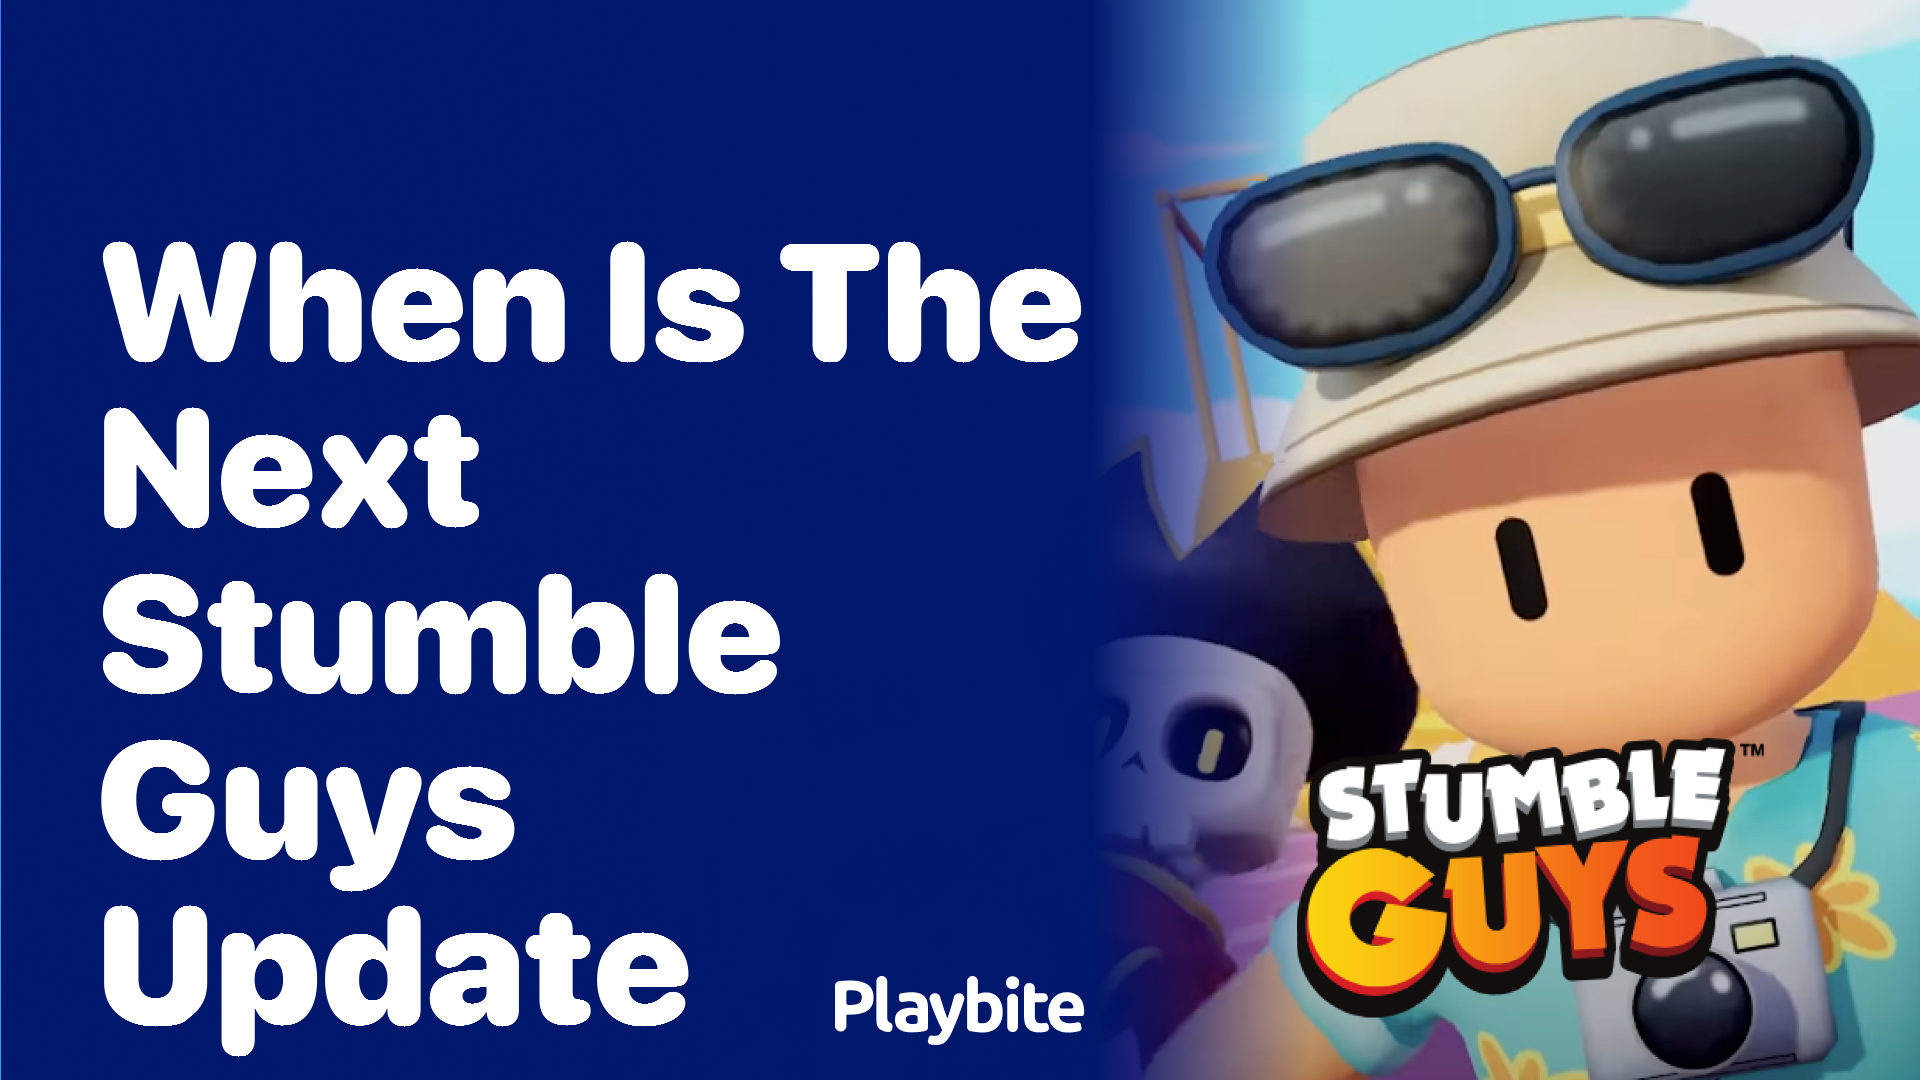 When is the Next Stumble Guys Update?